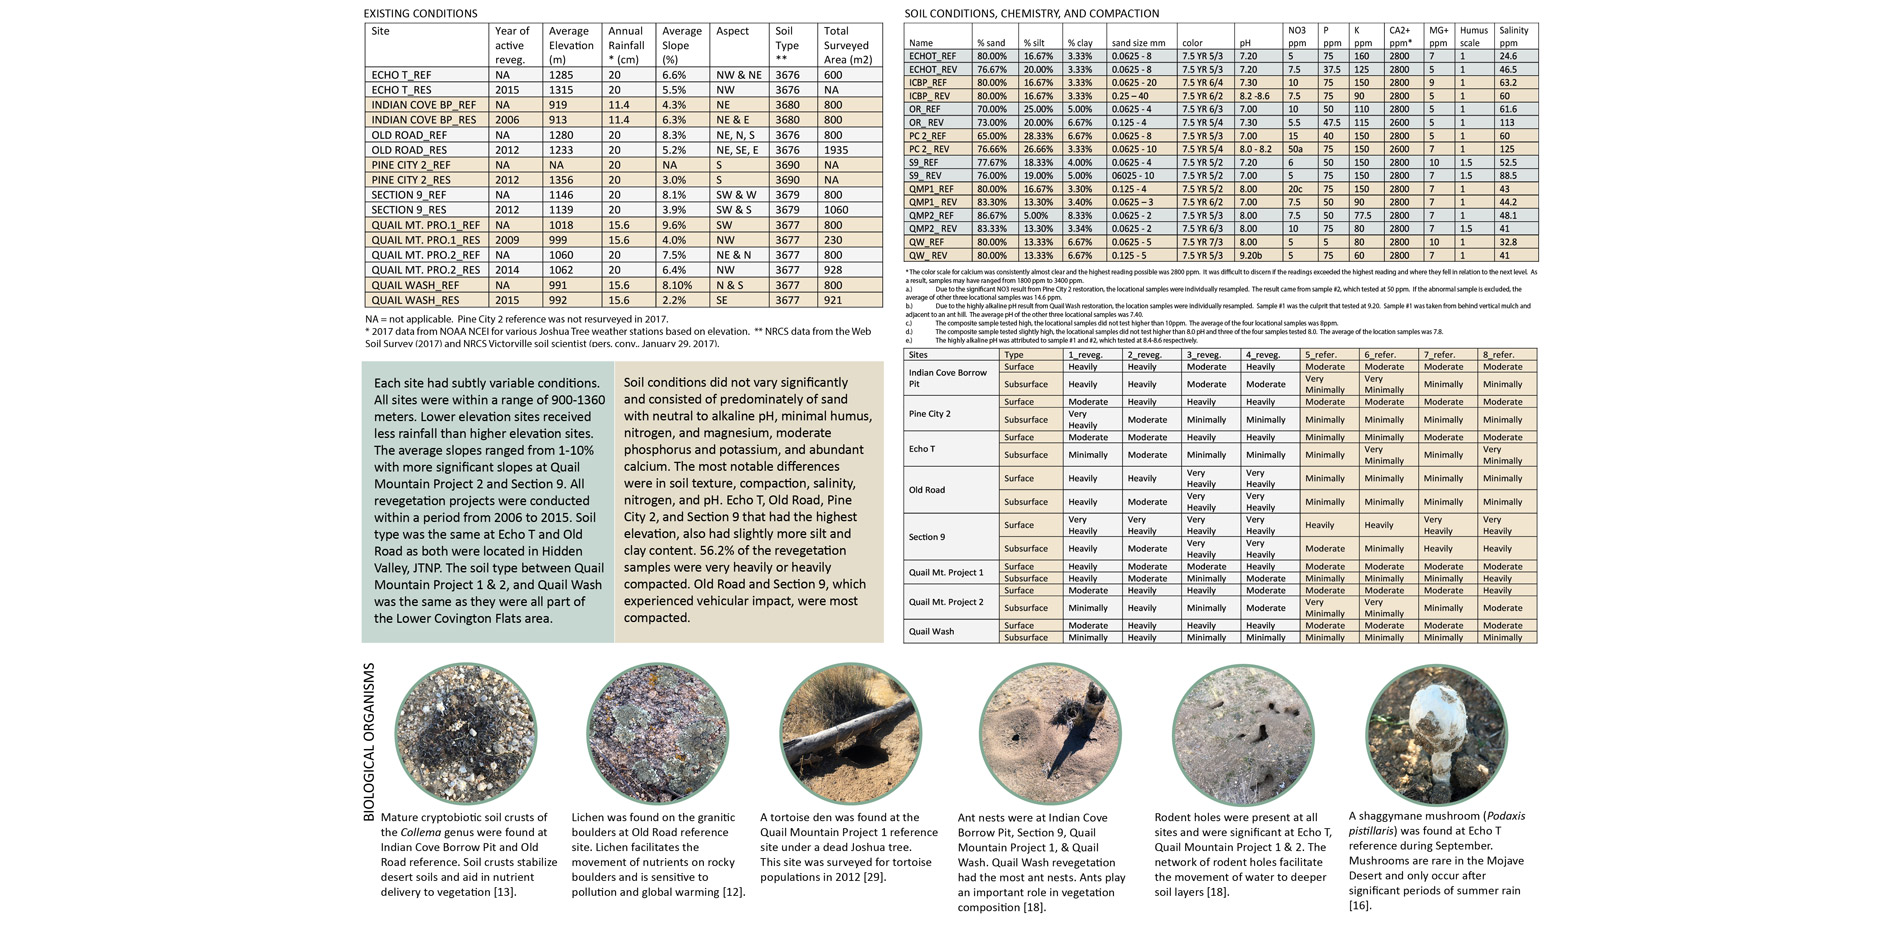 Analysis and comparison of the existing conditions, soil texture, chemistry, compaction data from the field surveys. Images below show unique biologic…